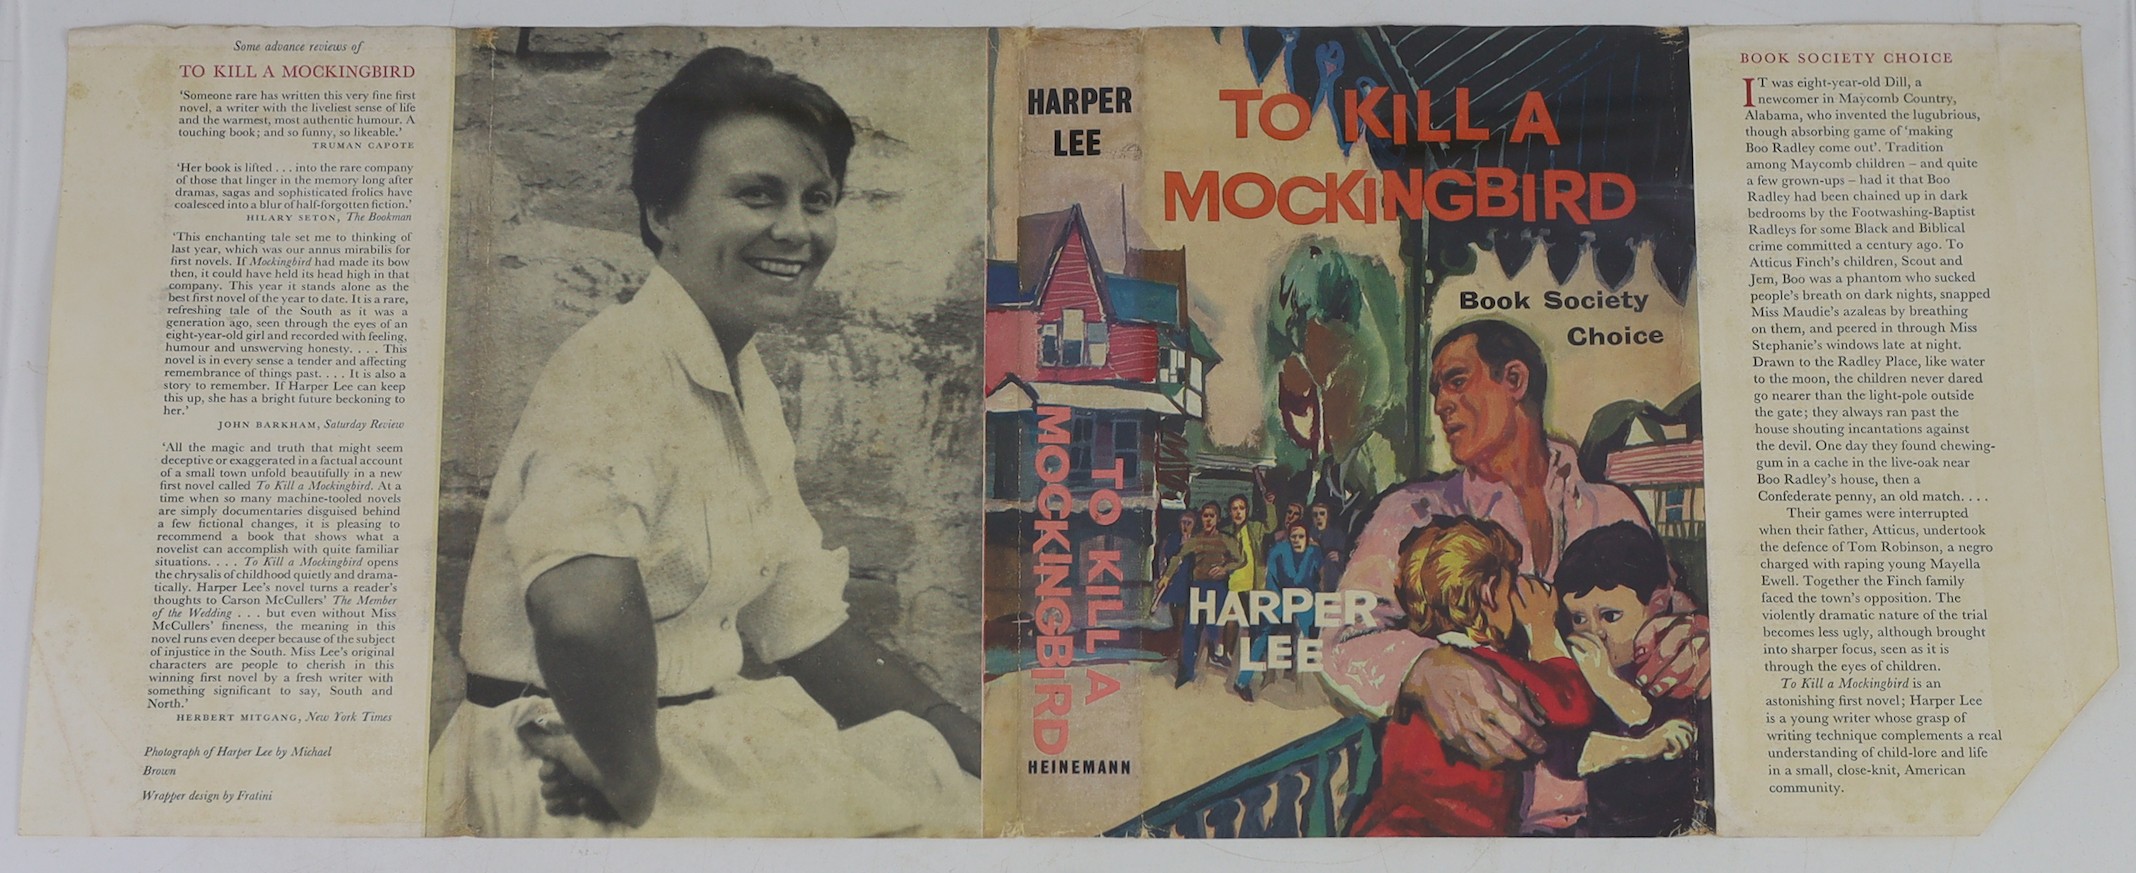 Lee, Harper - To Kill a Mockingbird, 1st English edition, 8vo, cloth in clipped d/j, ownership inscription to front fly leaf, William Heinemann, London, 1960